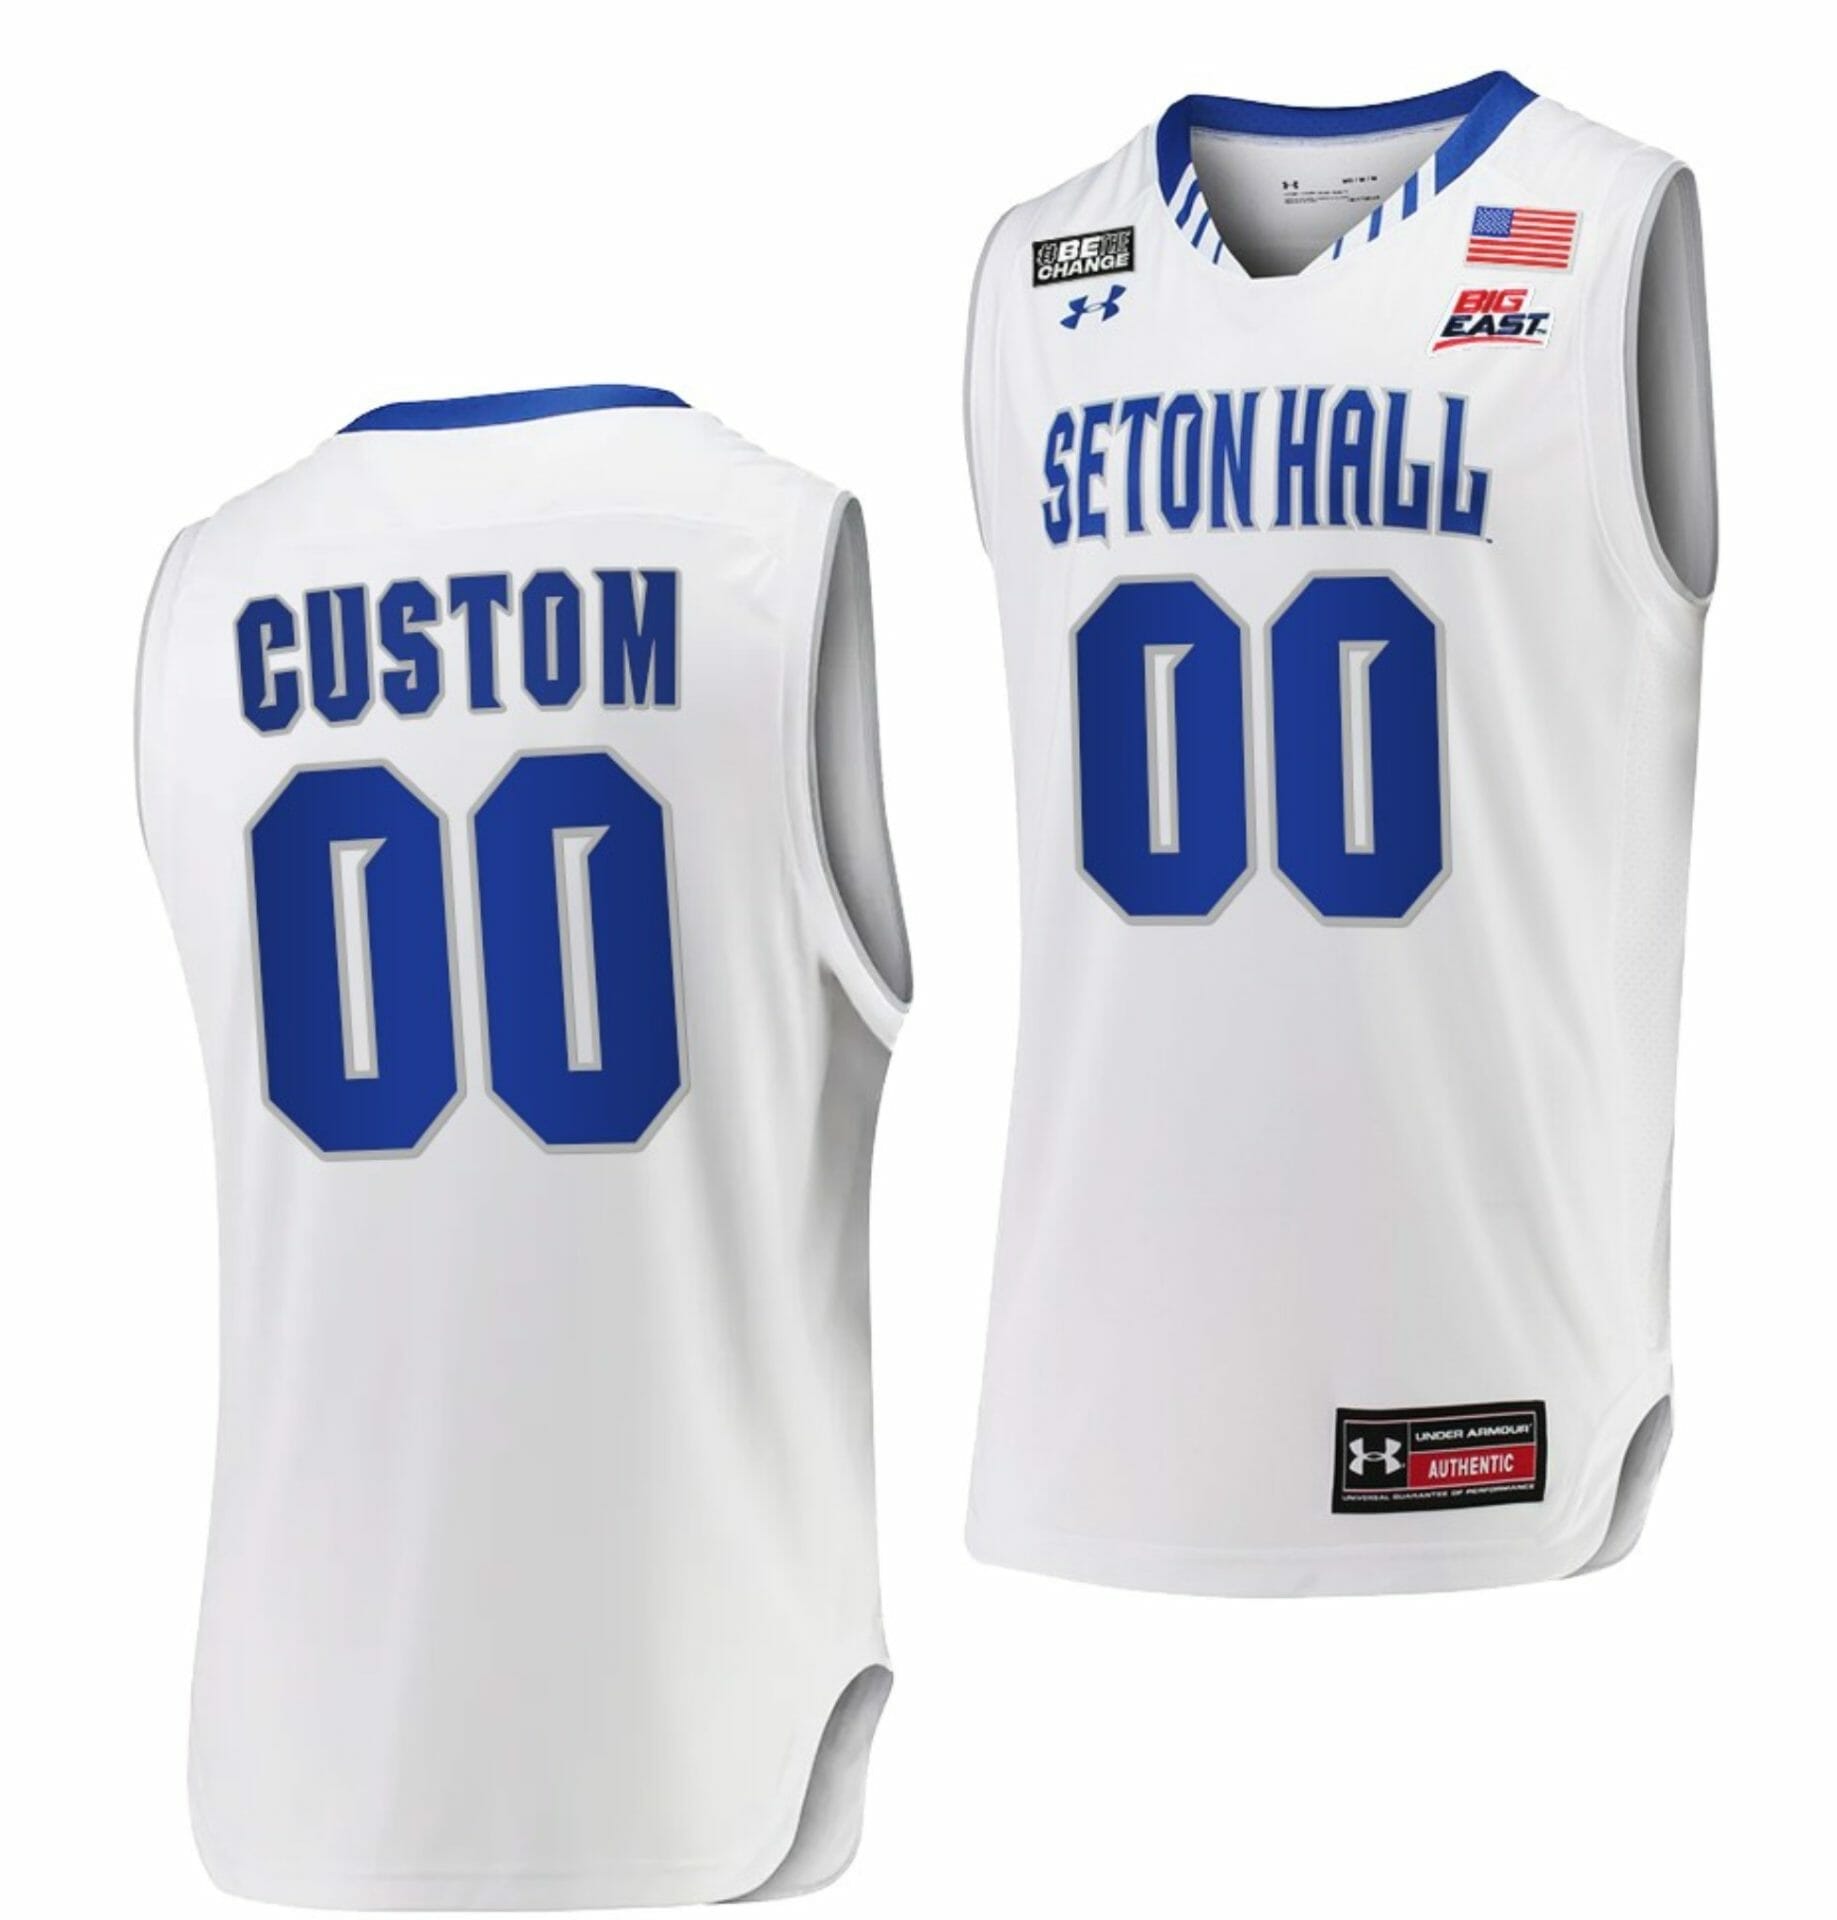 Custom College Basketball Jerseys Seton Hall Jersey Name and Number White